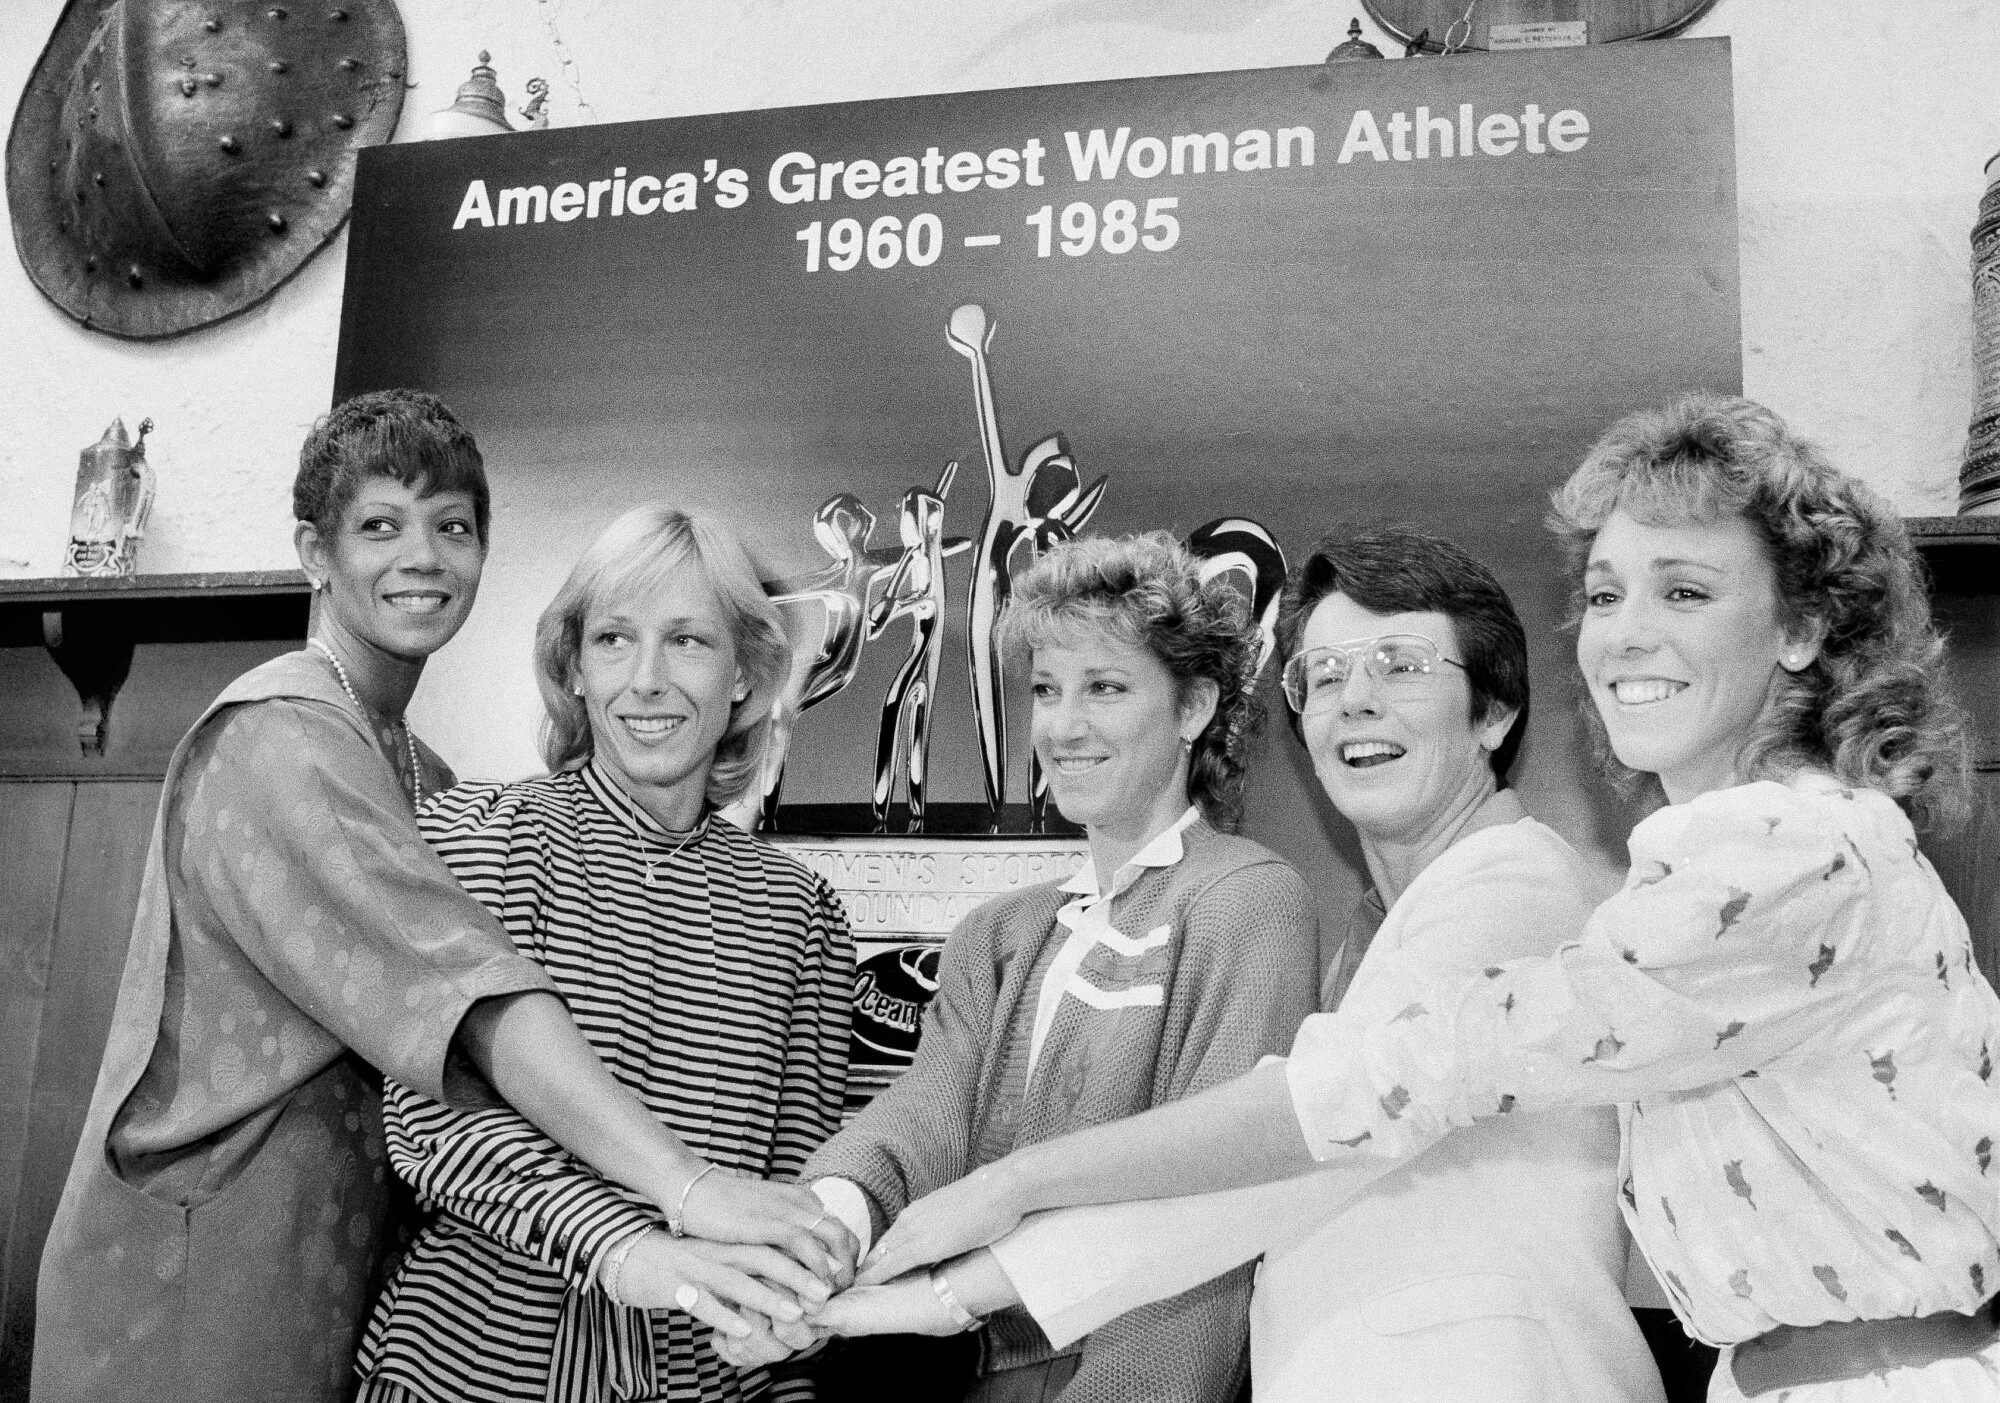 Wilma Rudolph, Martina Navratilova, Chris Evert, Billie Jean King and Mary Decker pose together in 1984.